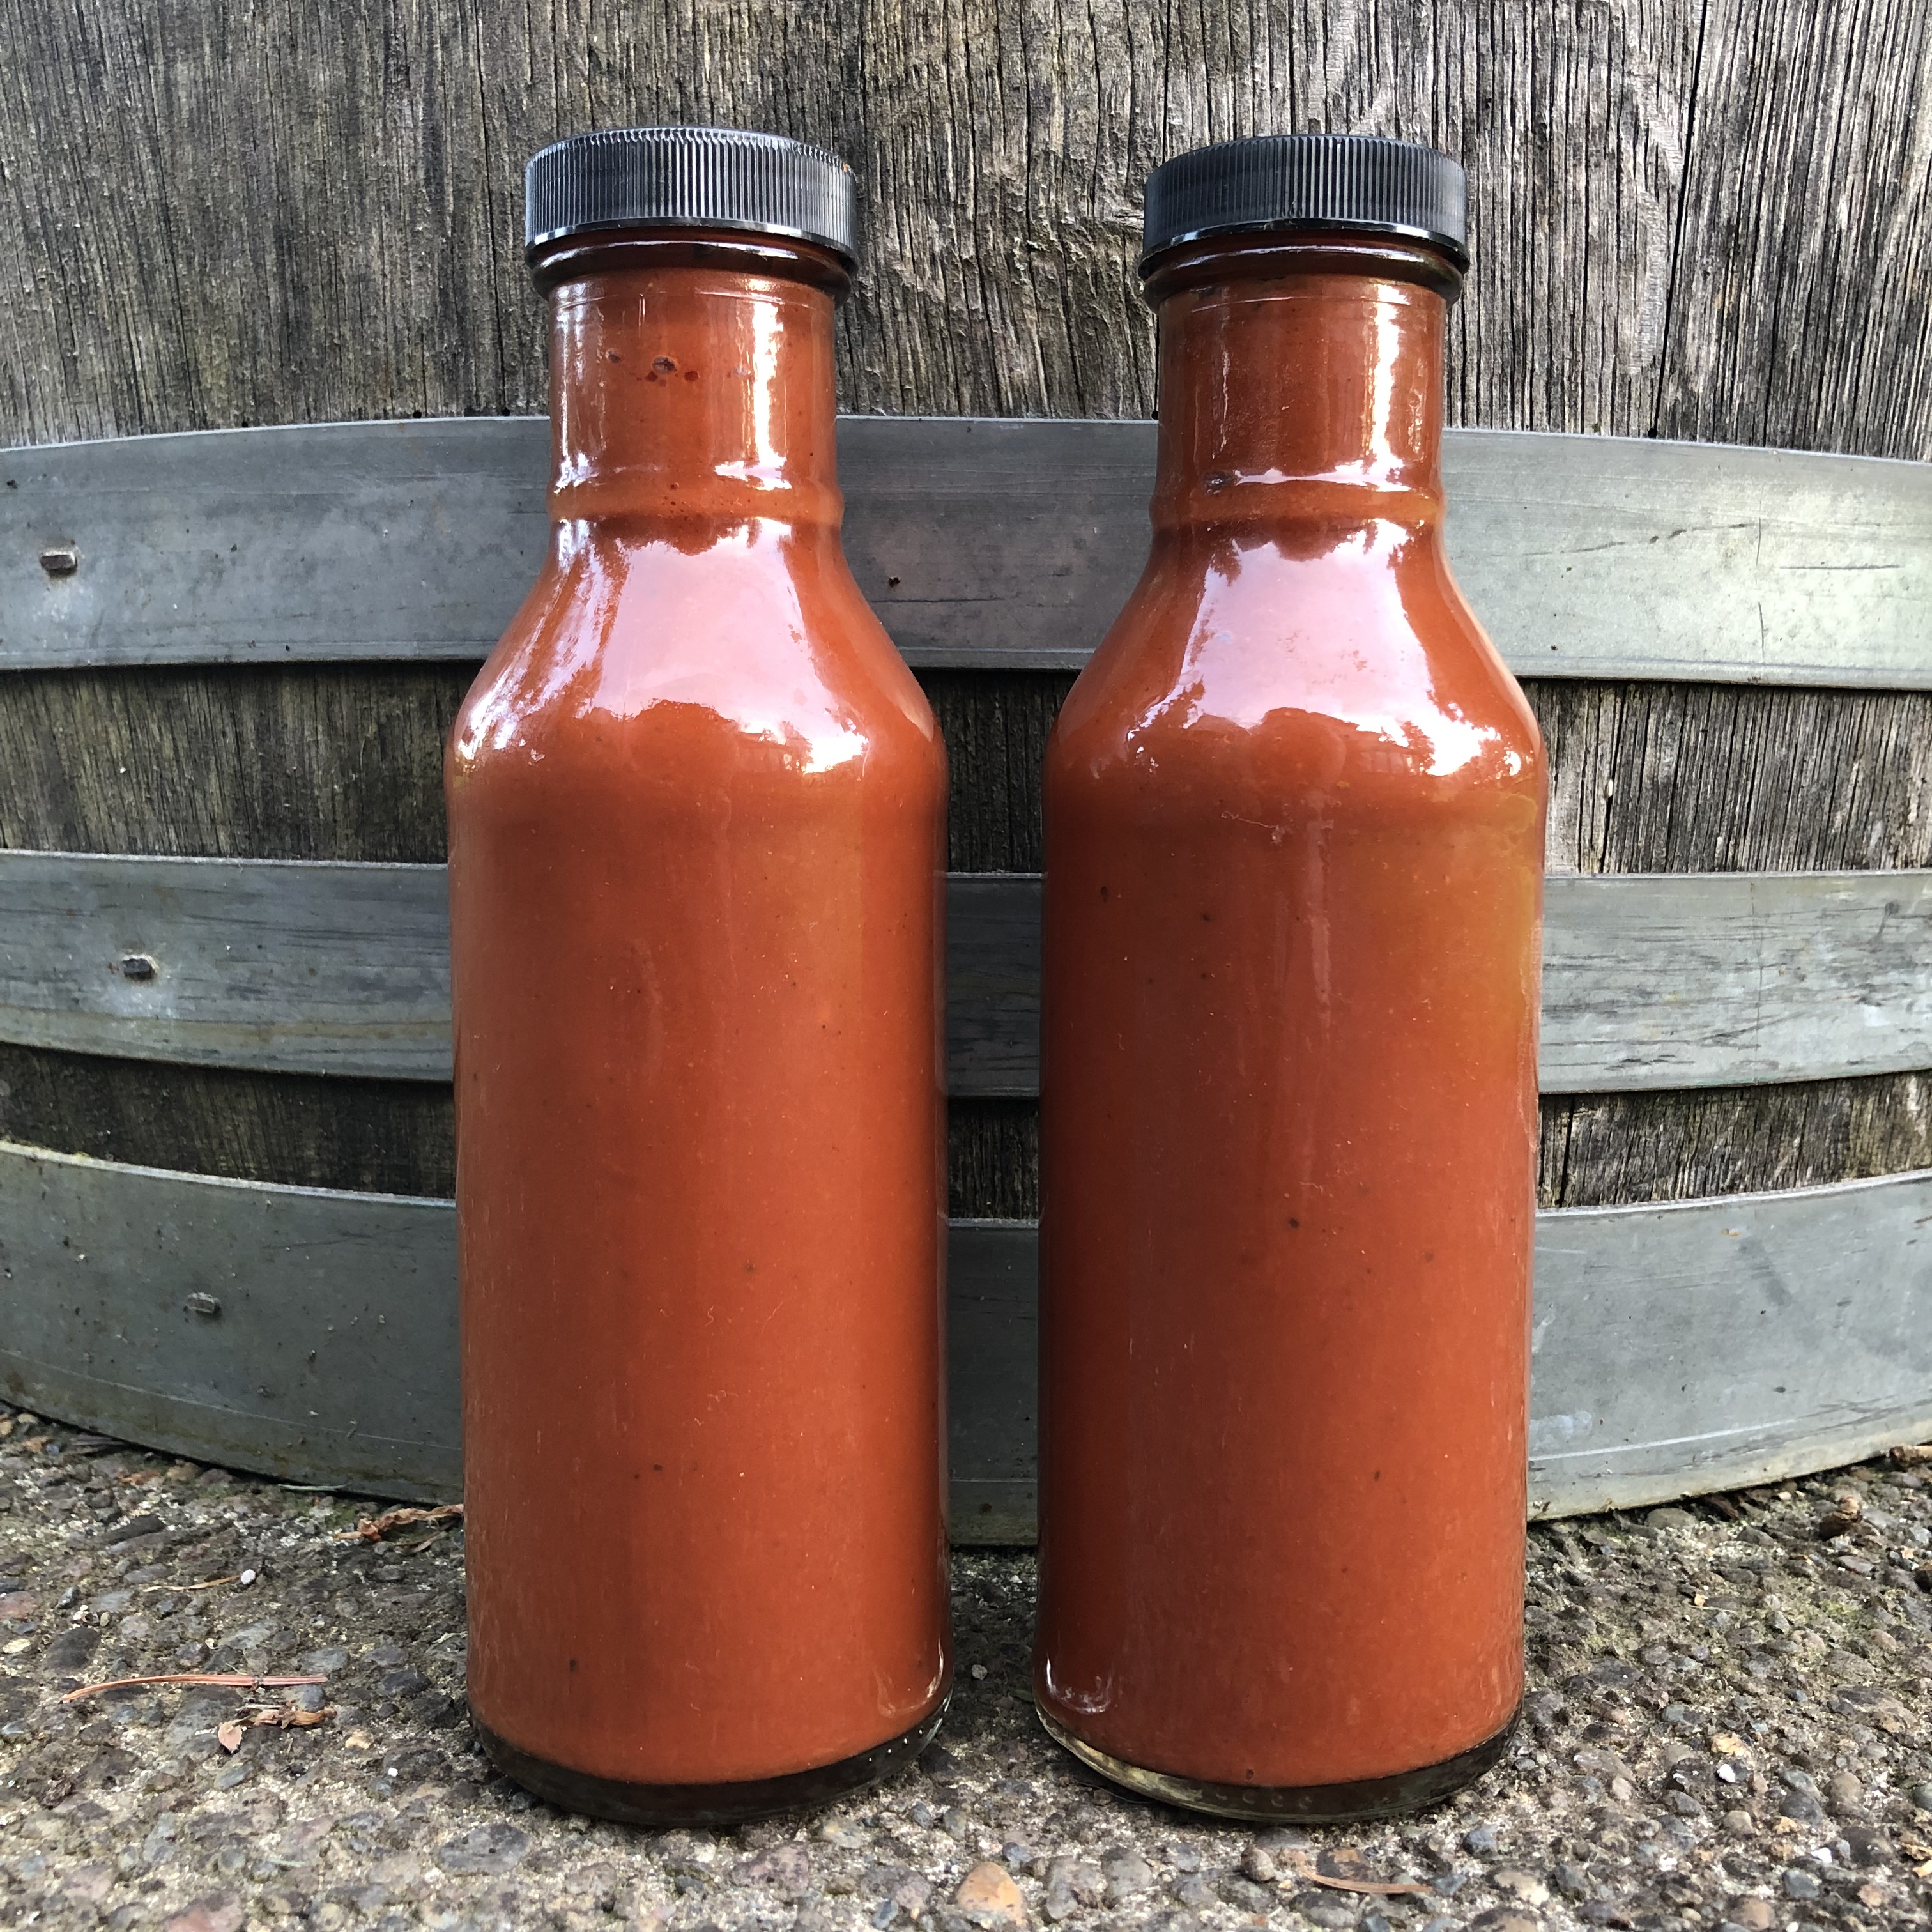 Cultured Tomato Sauce (Probiotic Ketchup)